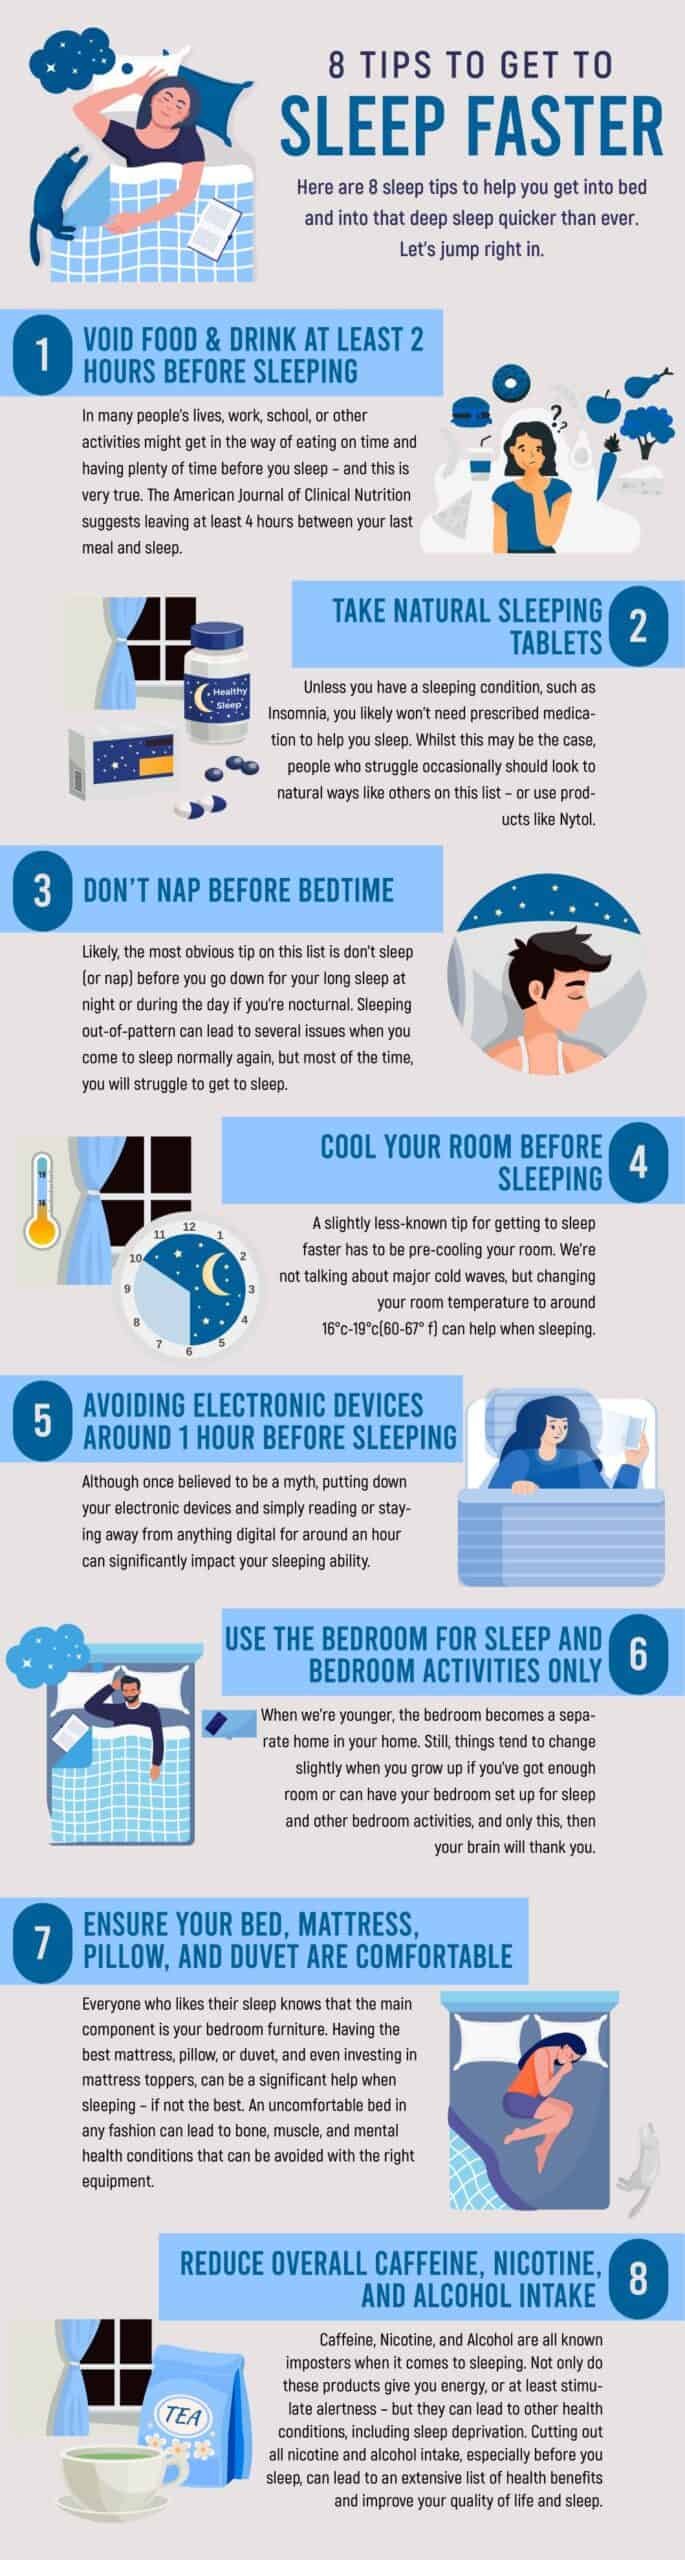 8 Tips to get to Sleep Faster